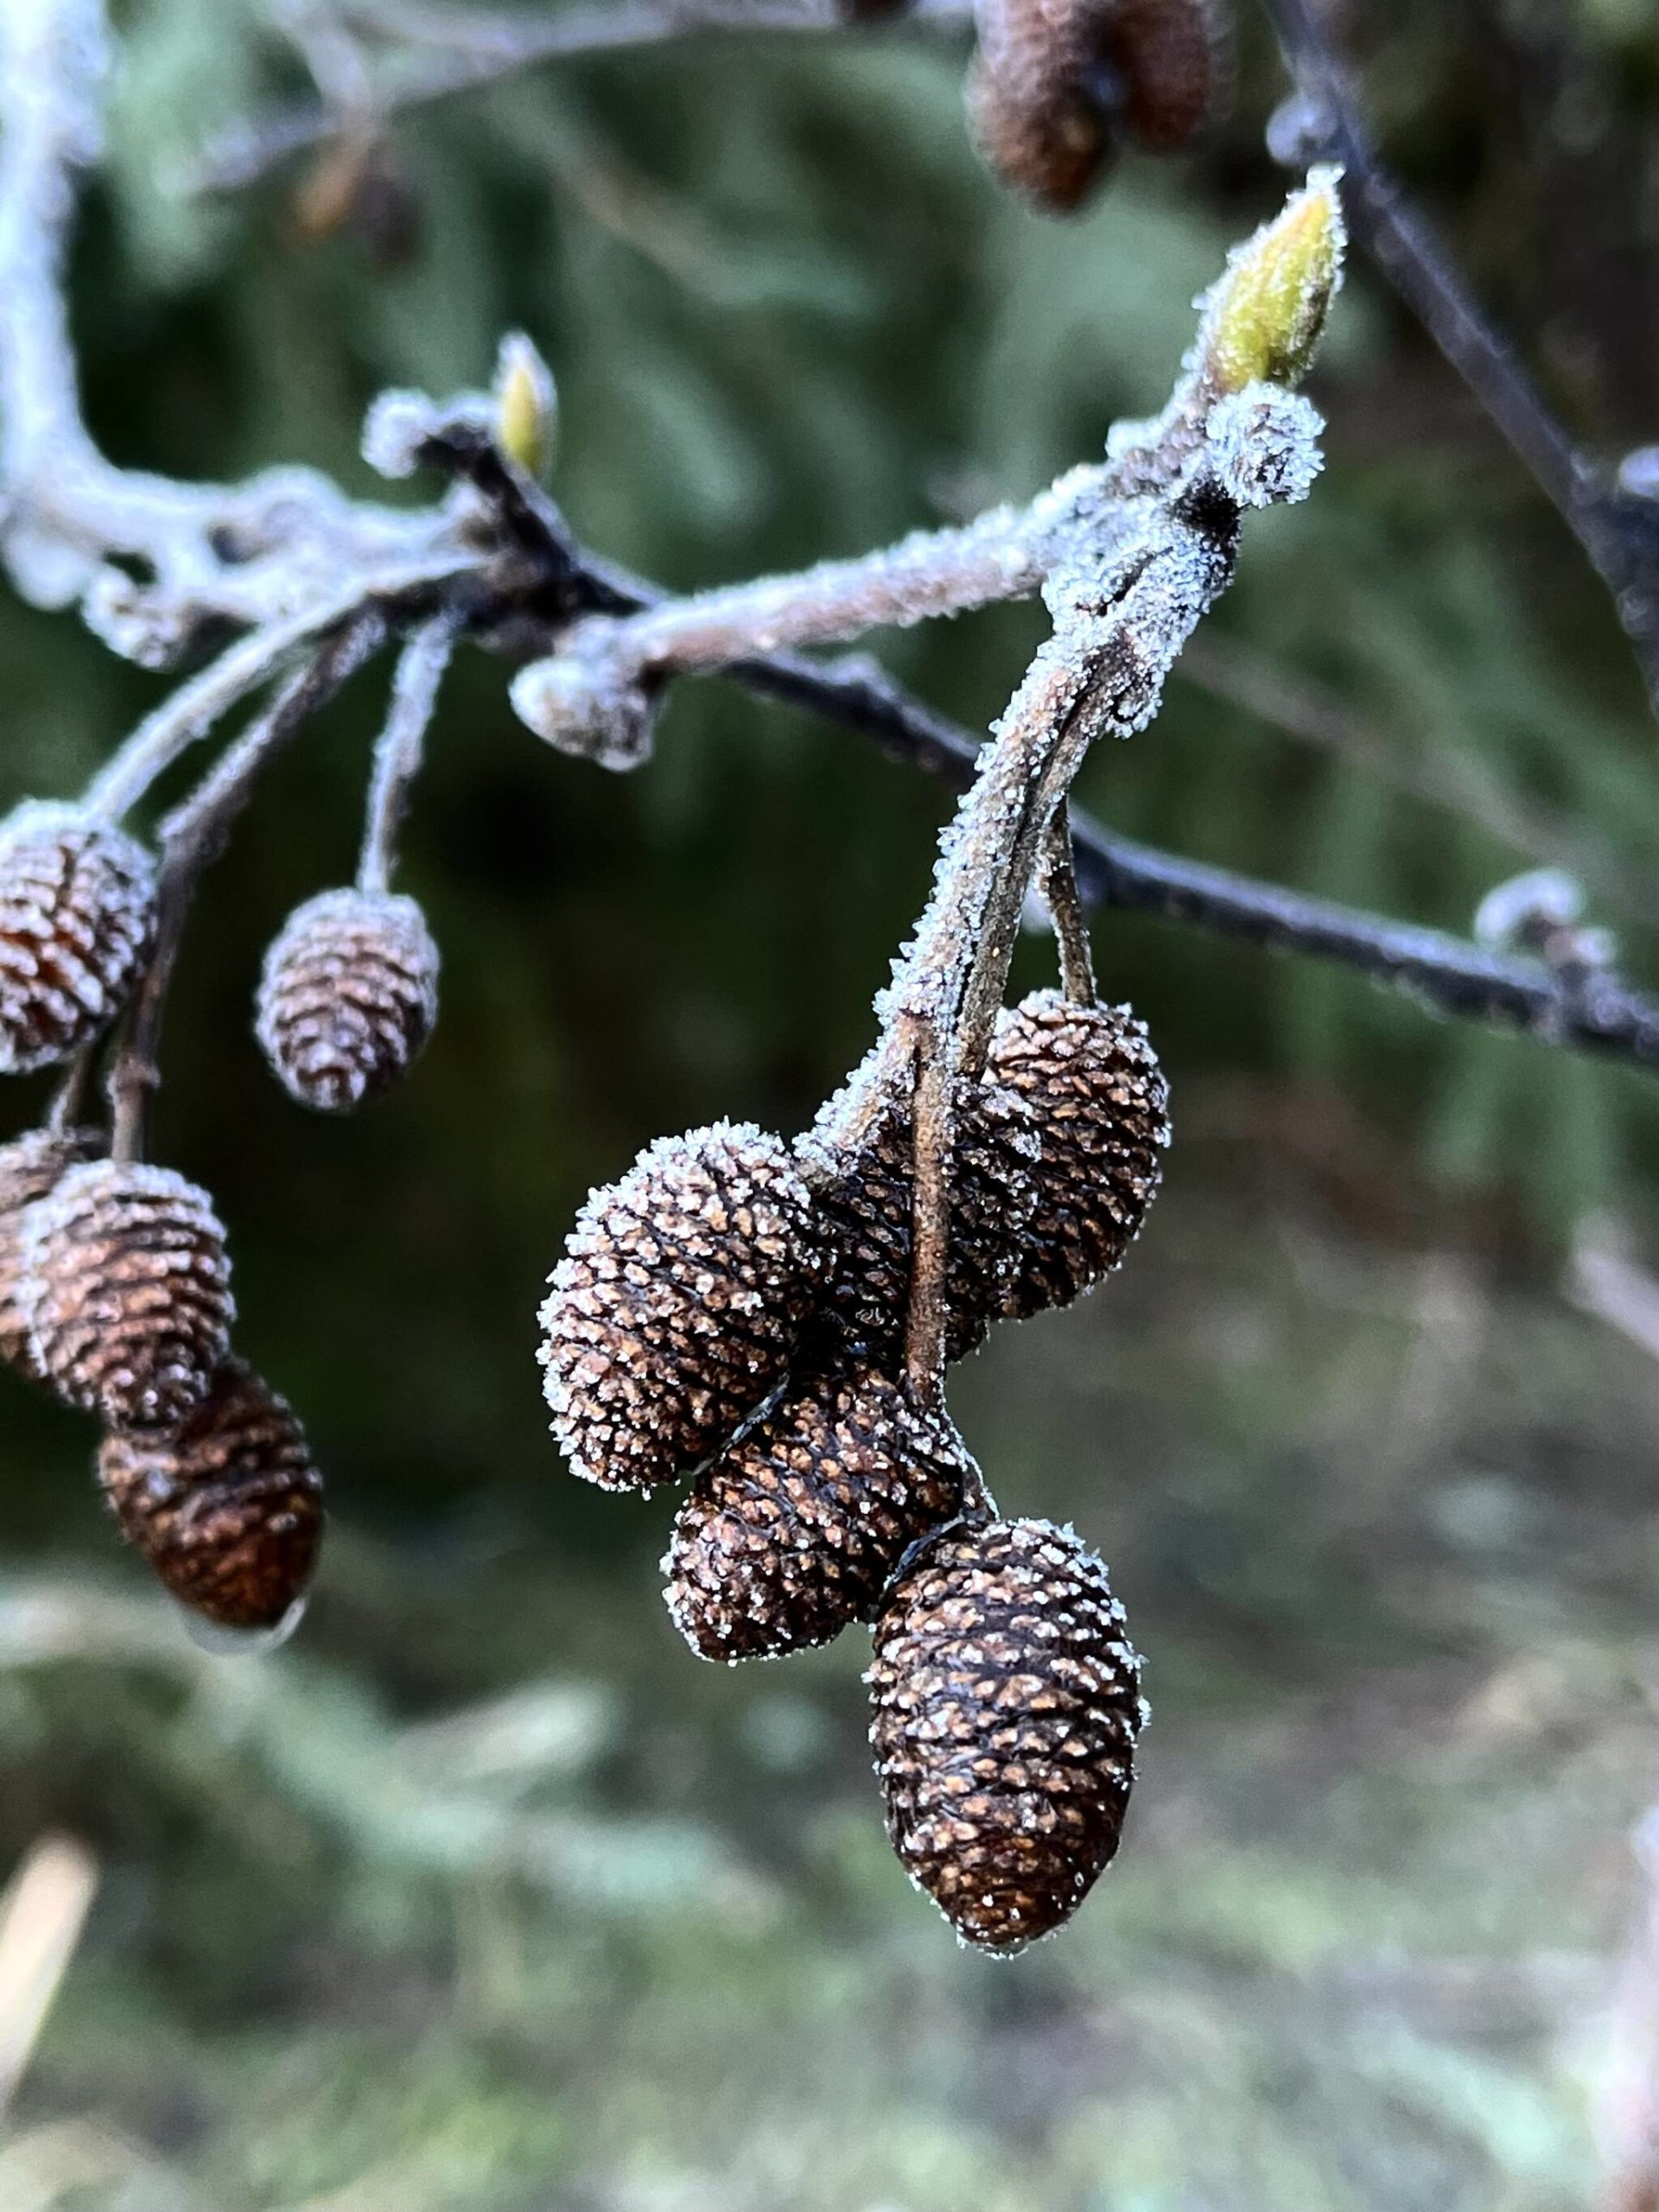 This photo shows frosty alder cones and a green shoot. (Courtesy Photo / Linda Buckley)